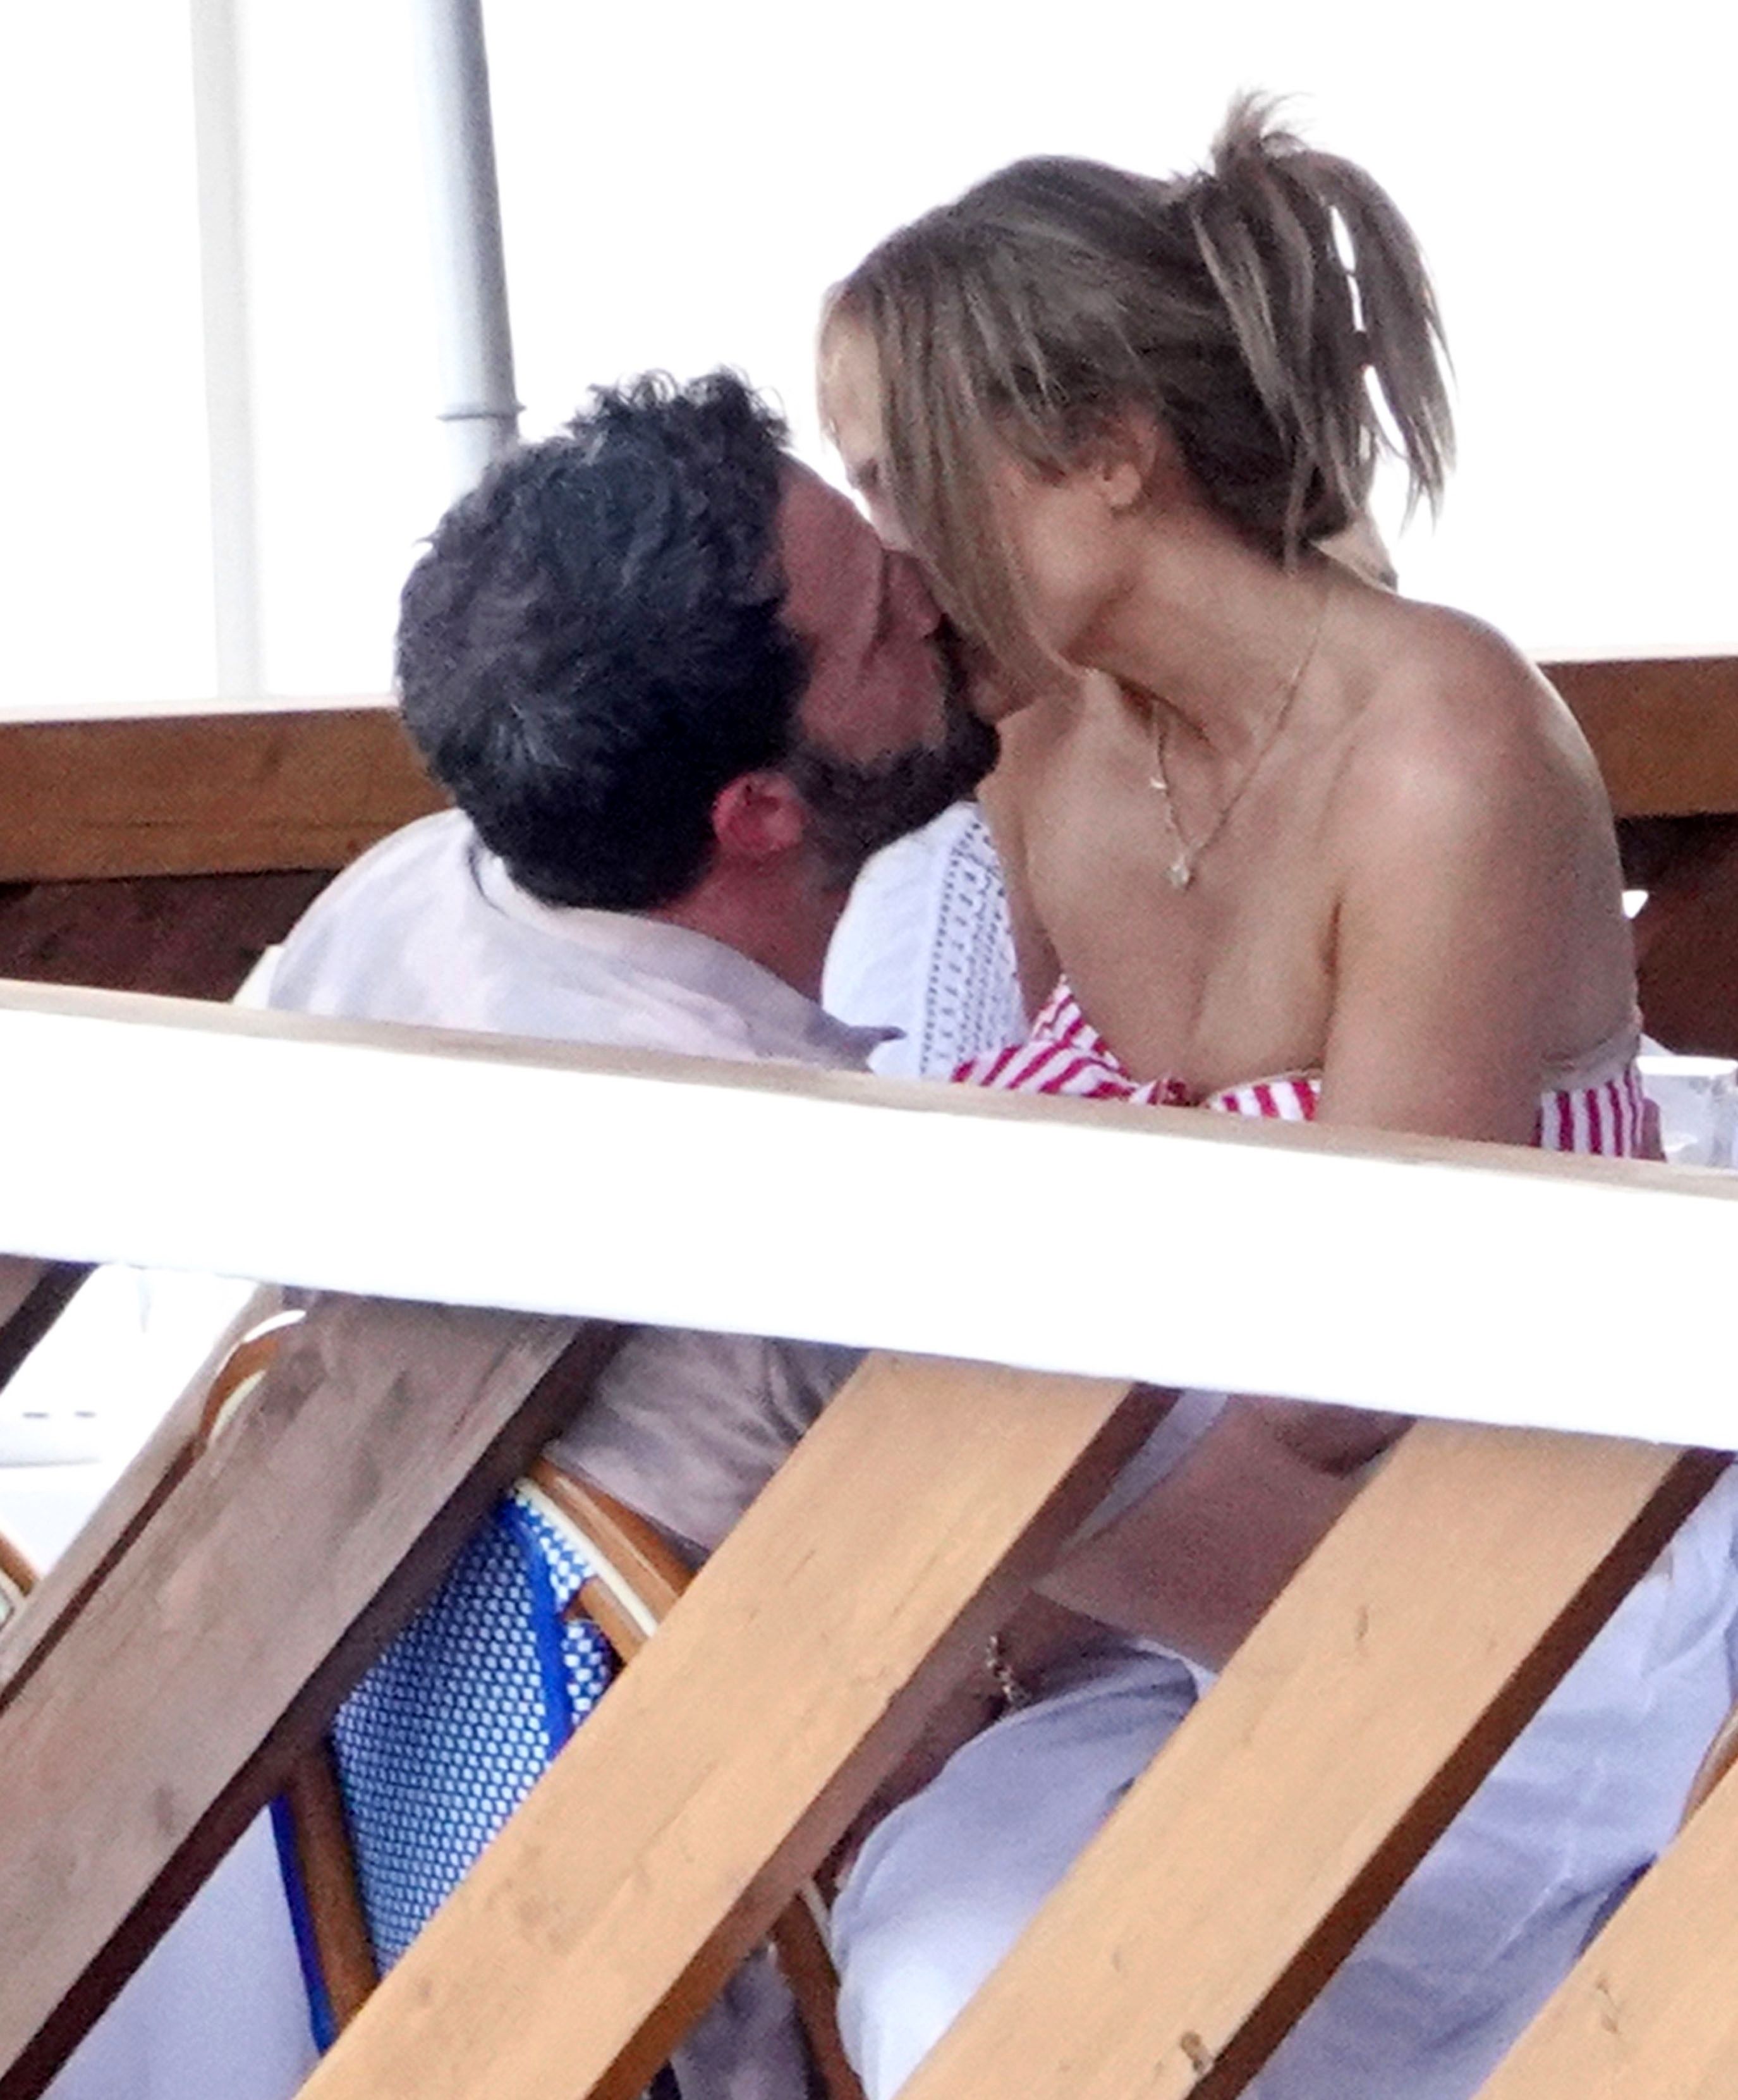 See Jennifer Lopez and Ben Affleck Making Out at Italy Restaurant pic image photo